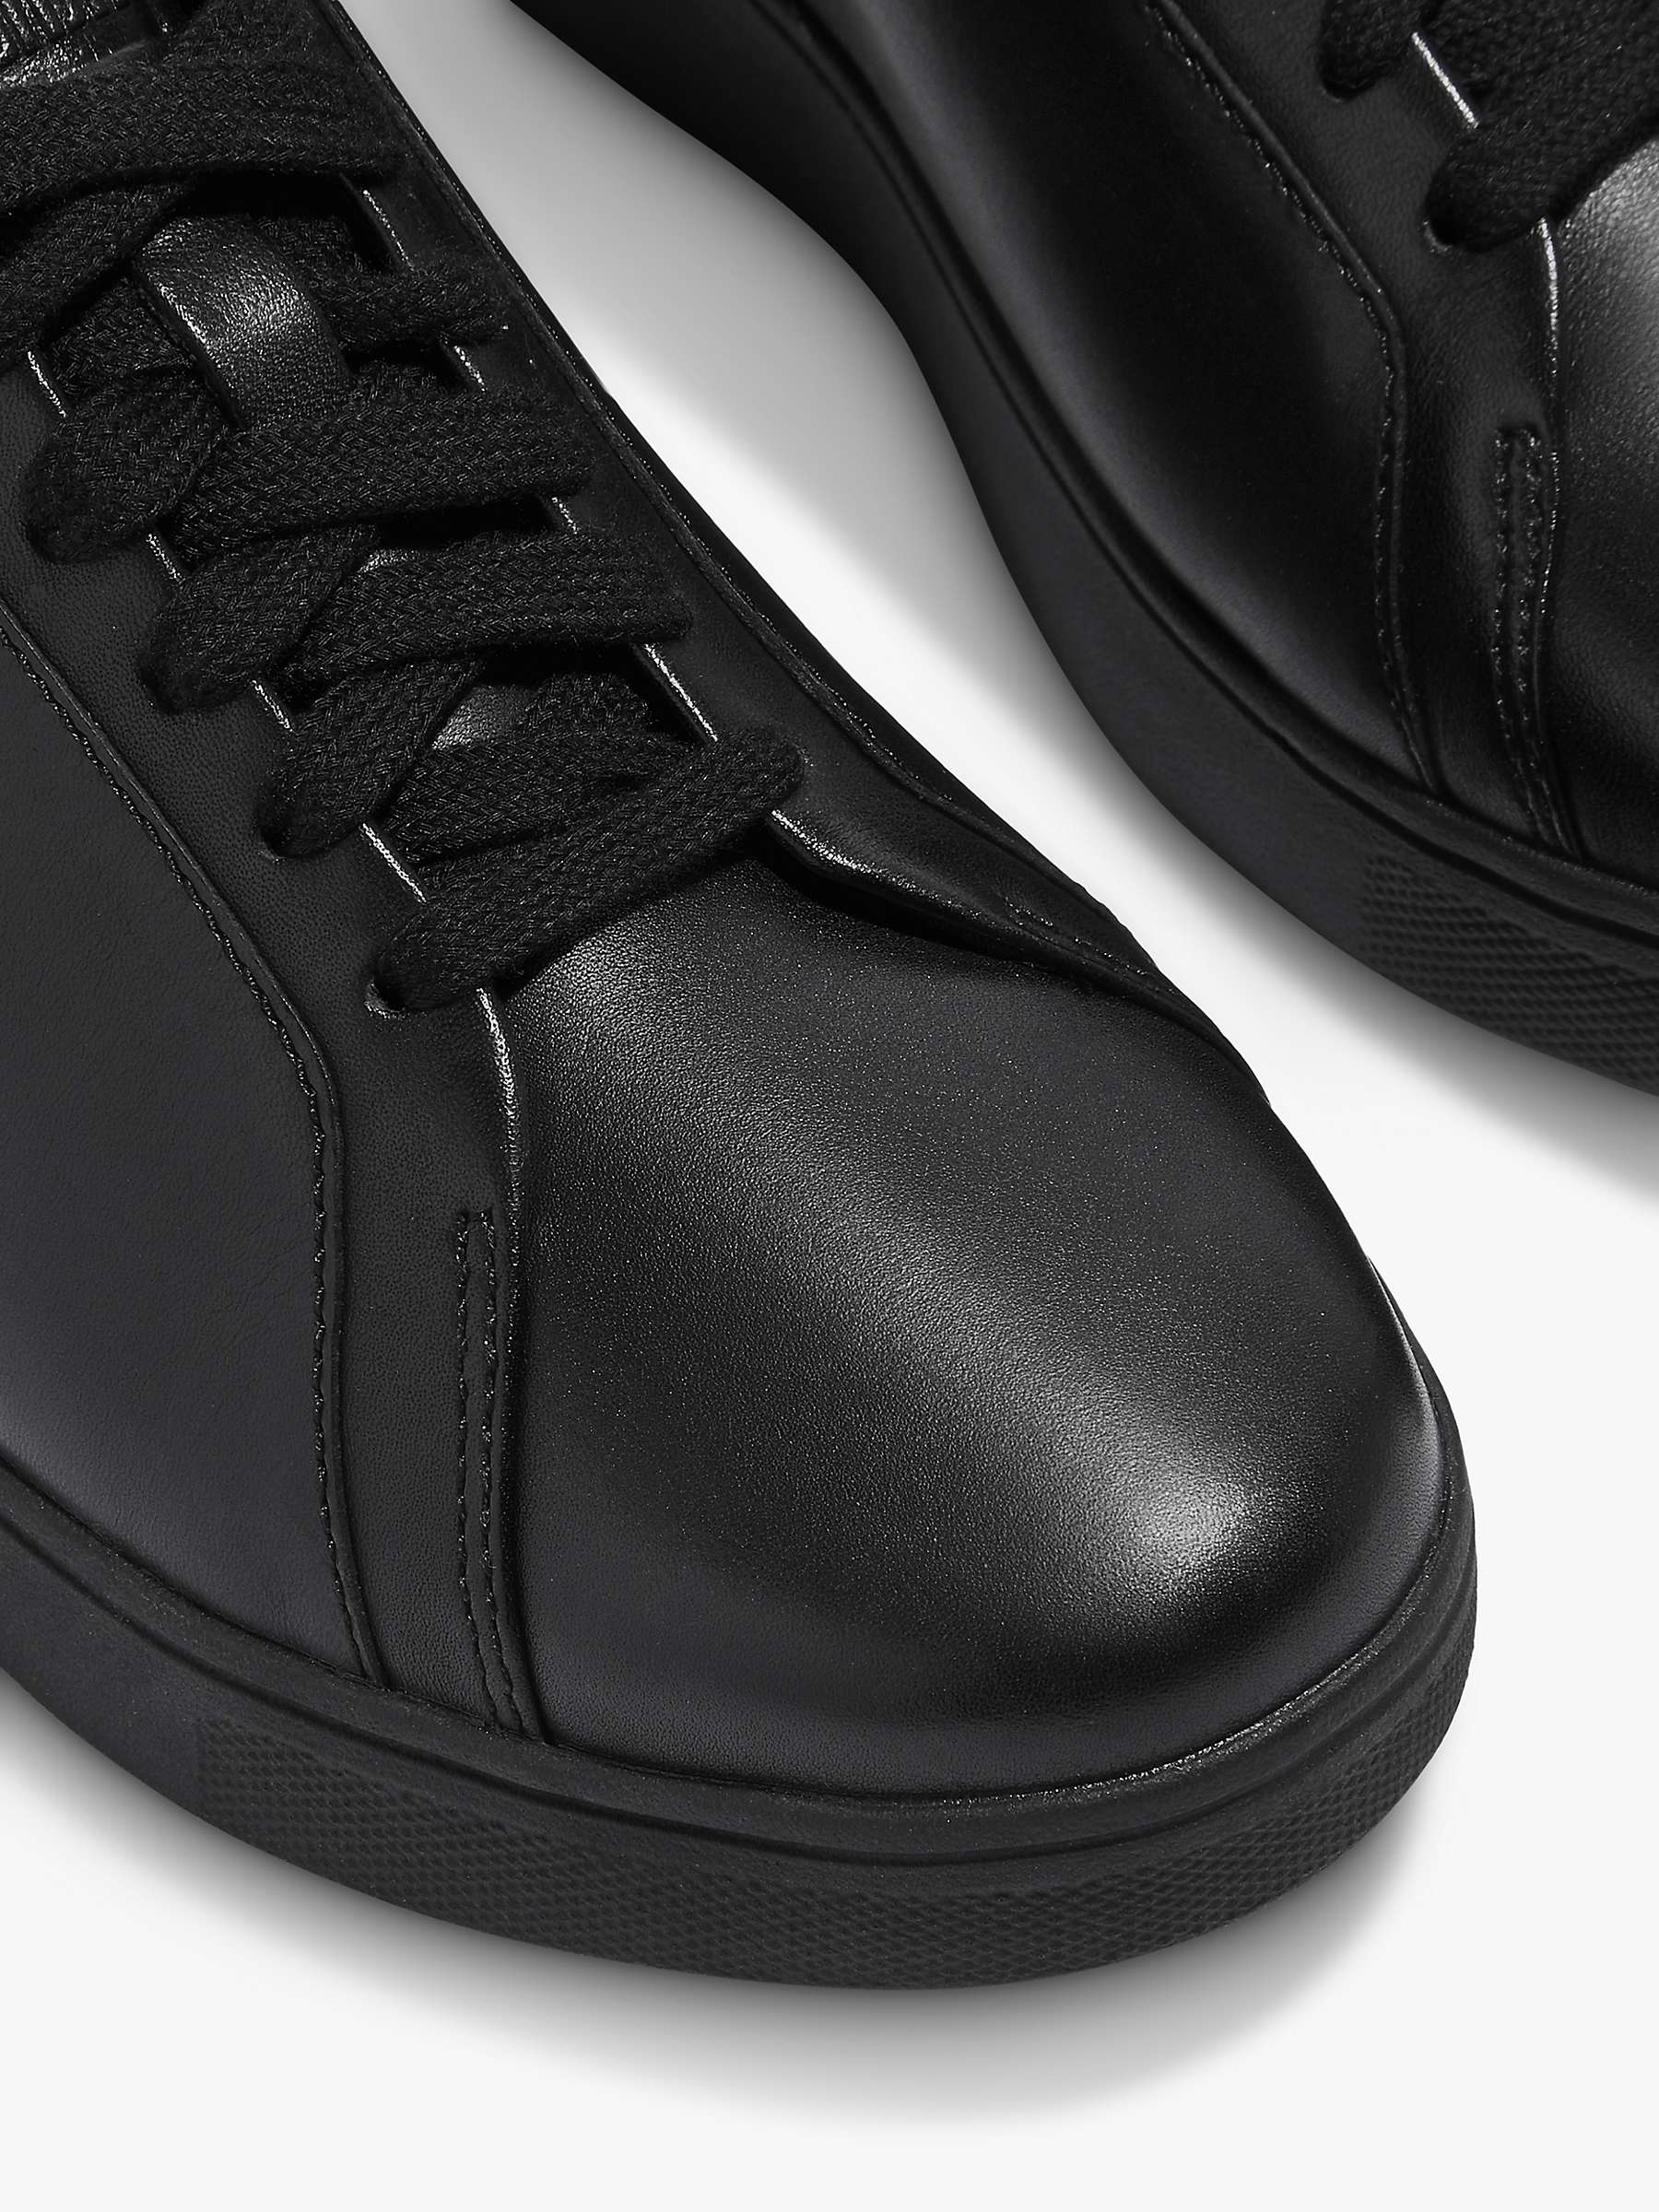 FitFlop Rally Lace Up Leather Trainers, Black at John Lewis & Partners